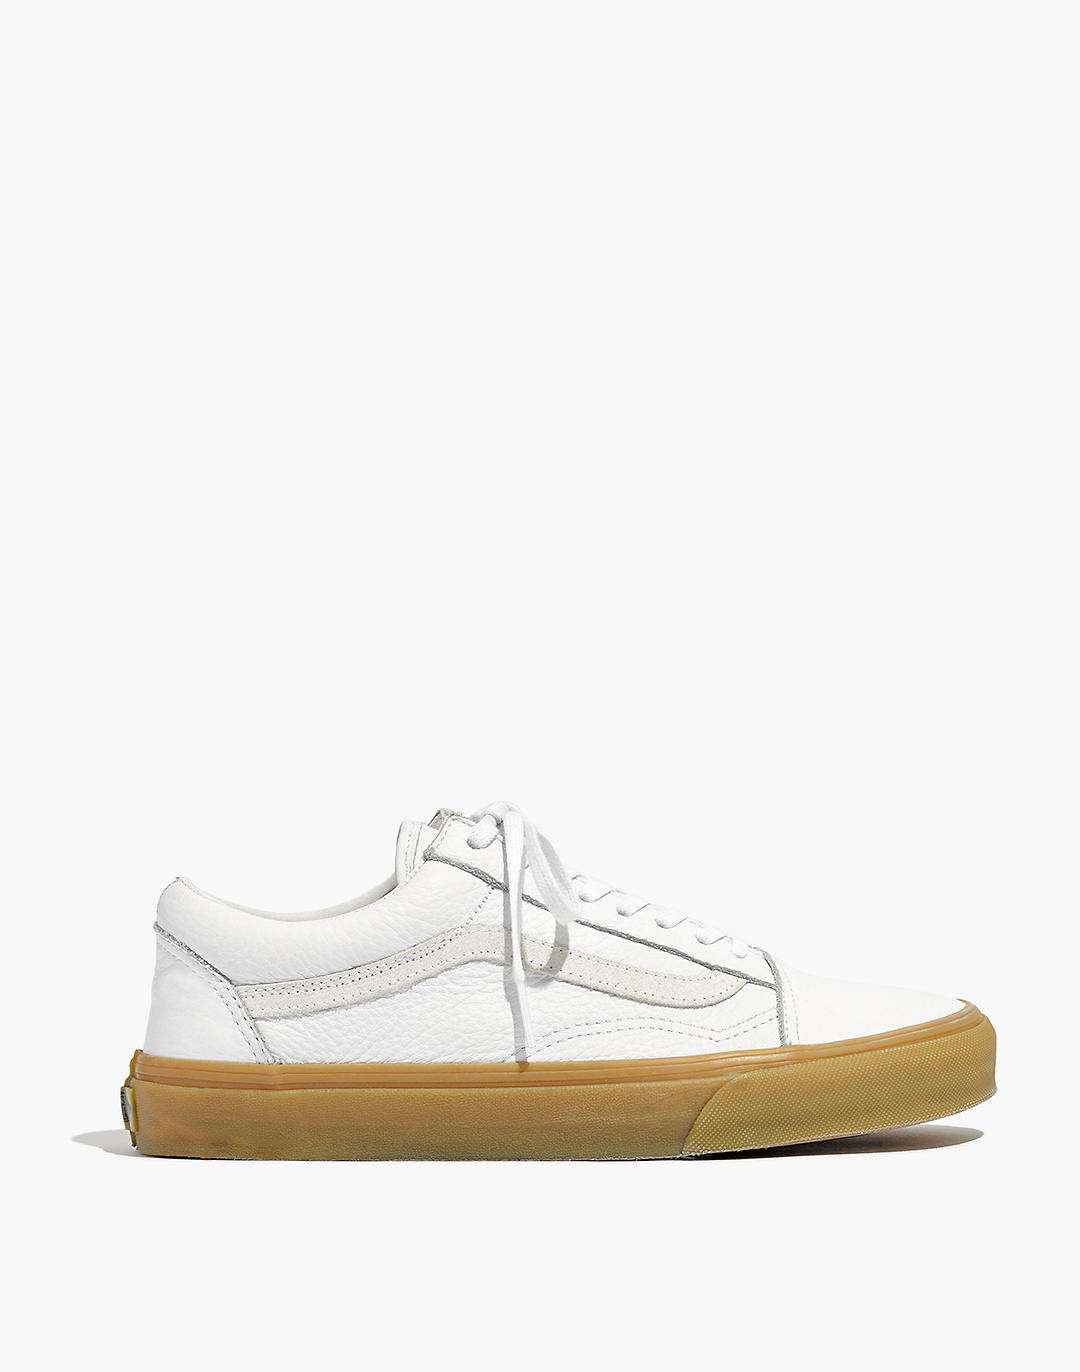 Madewell x Vans® Unisex Old Skool Lace-Up Sneakers in Tumbled Leather